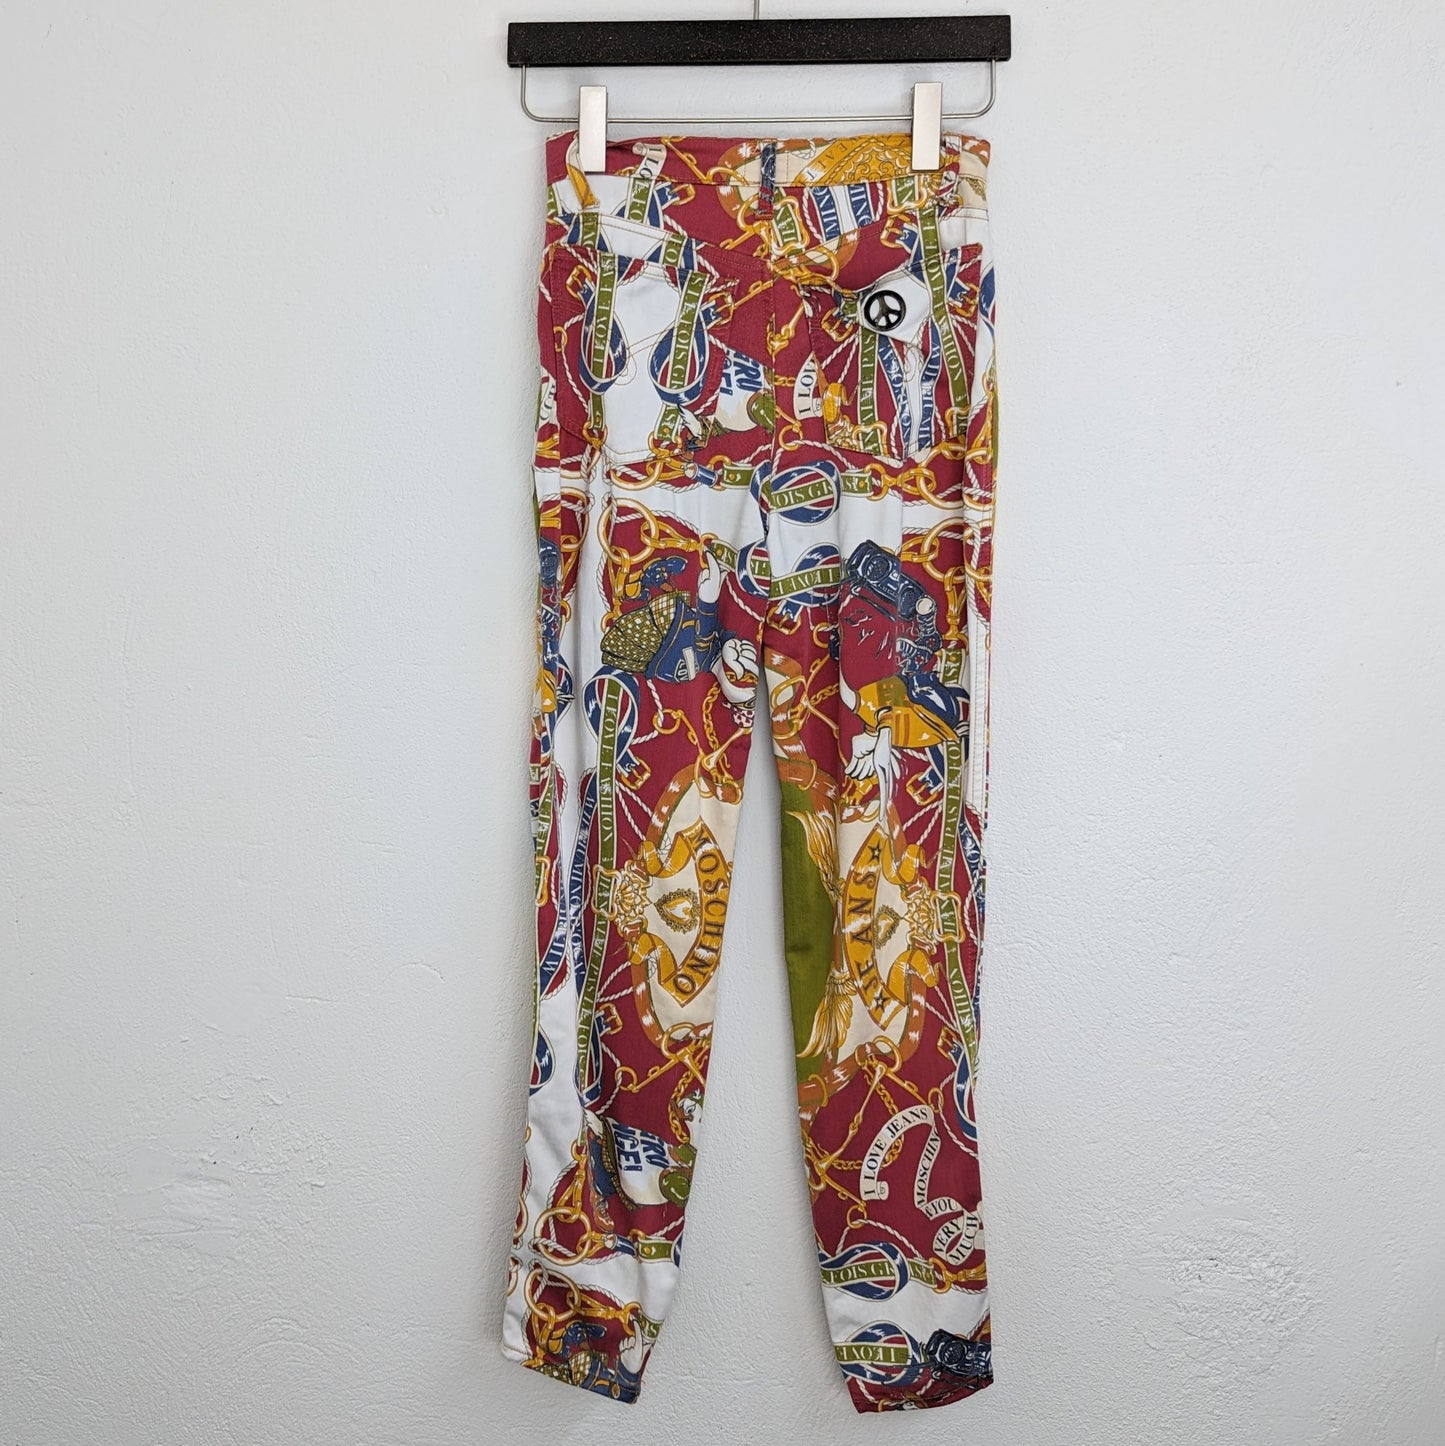 MOSCHINO JEANS VINTAGE Pants (XS)